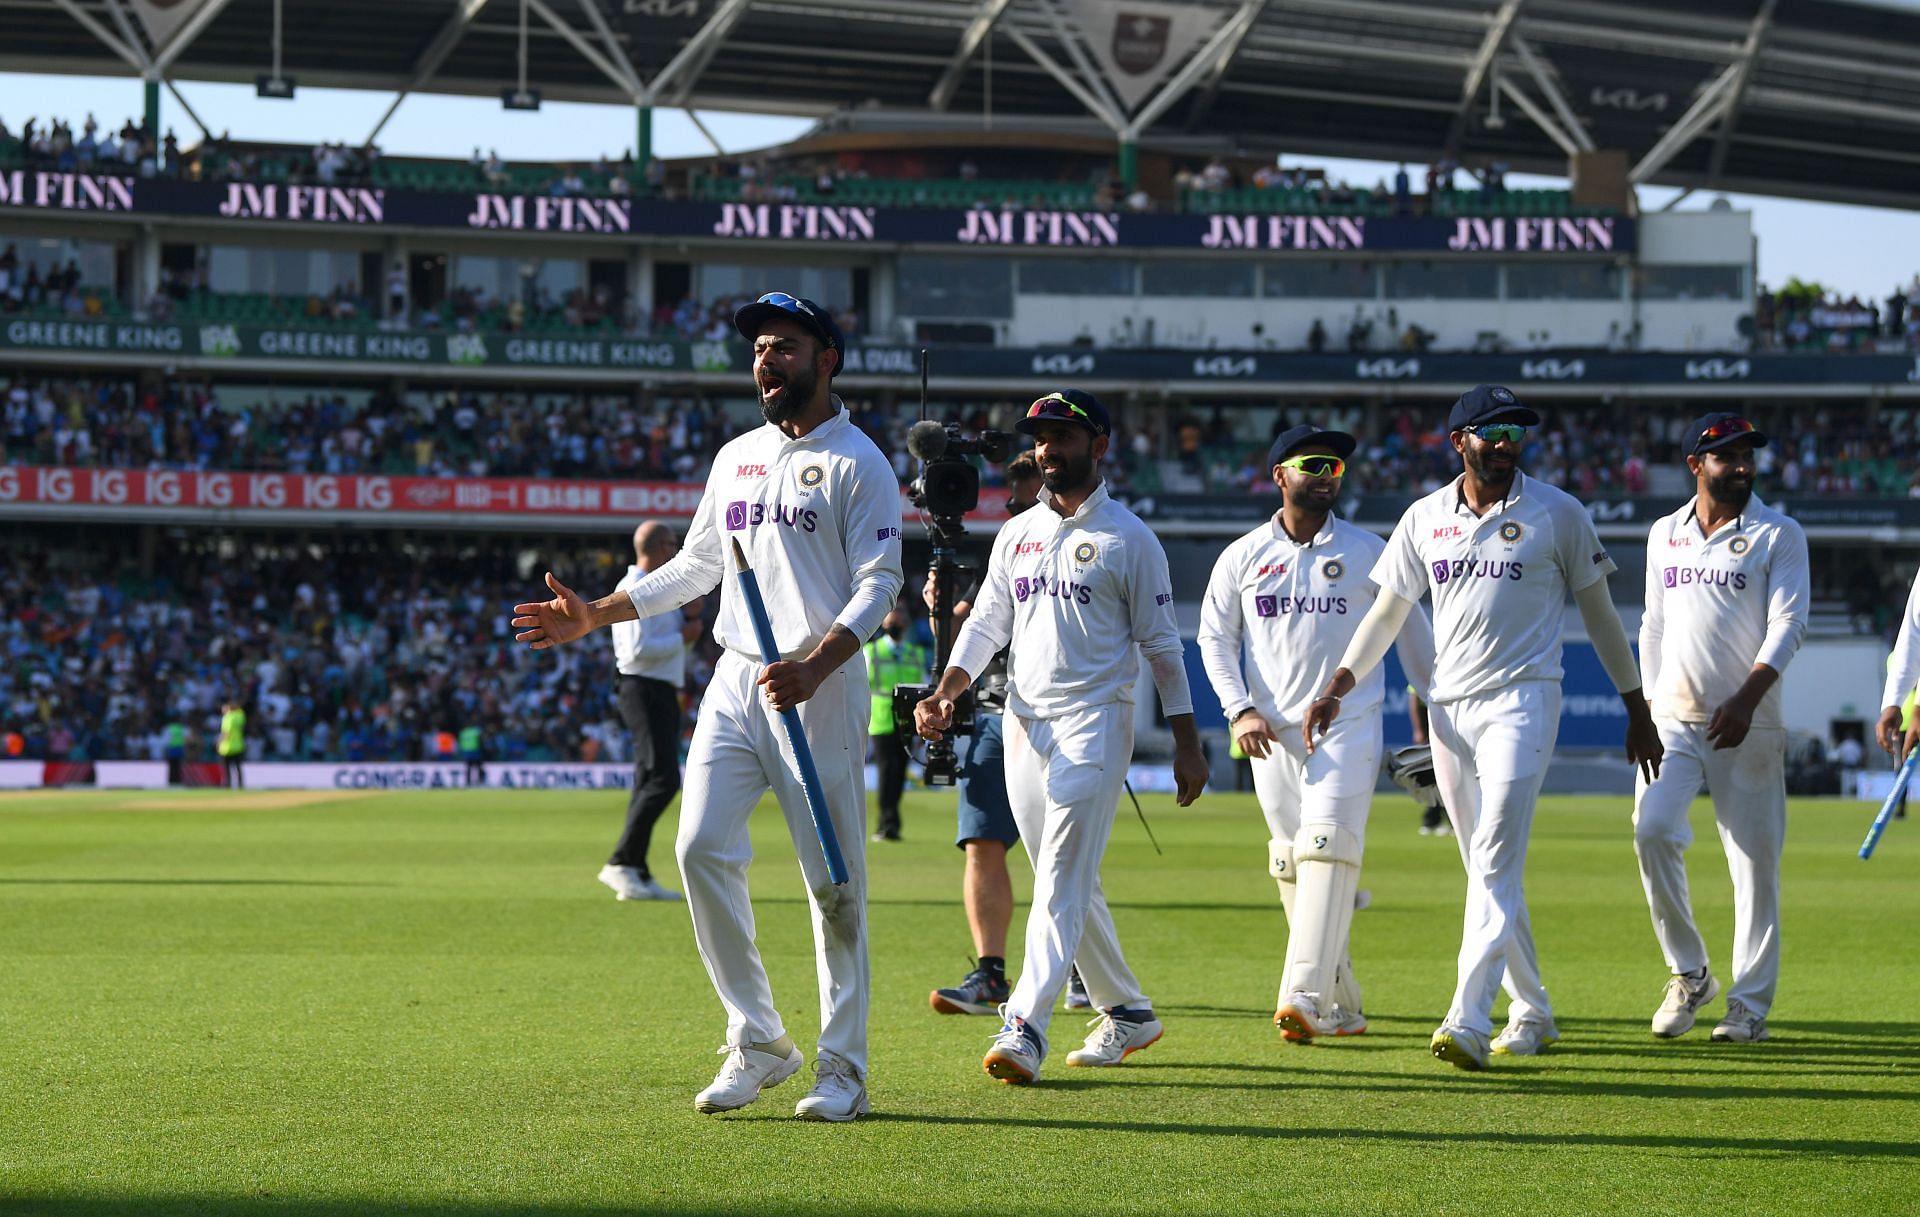 The captain leads his team off the field after India beat England at The Oval last year. Pic: Getty Images